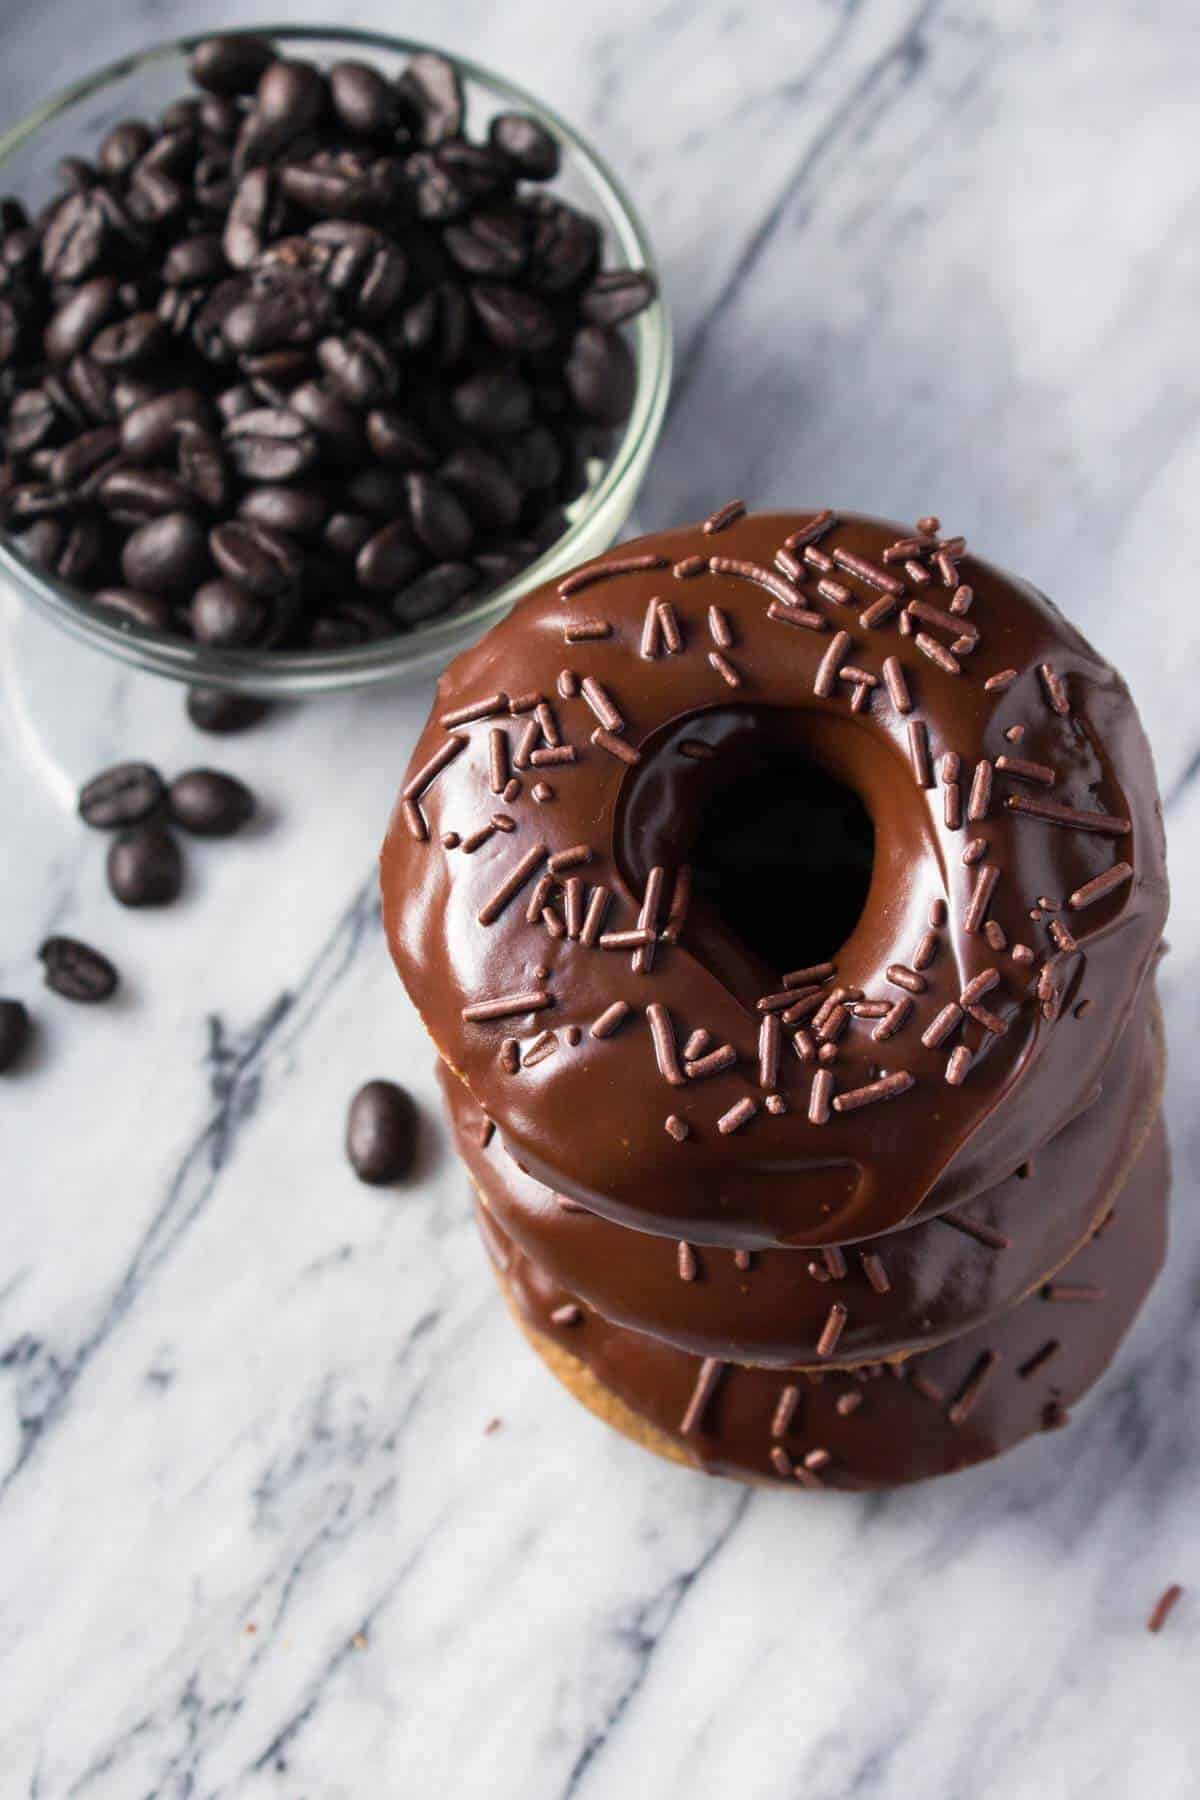 A delicious, coffee-flavored cake doughnut dipped in fudgy, chocolate glaze. These super easy Baked Mocha Doughnuts are the best way to get your morning caffeine fix! www.justsotasty.com